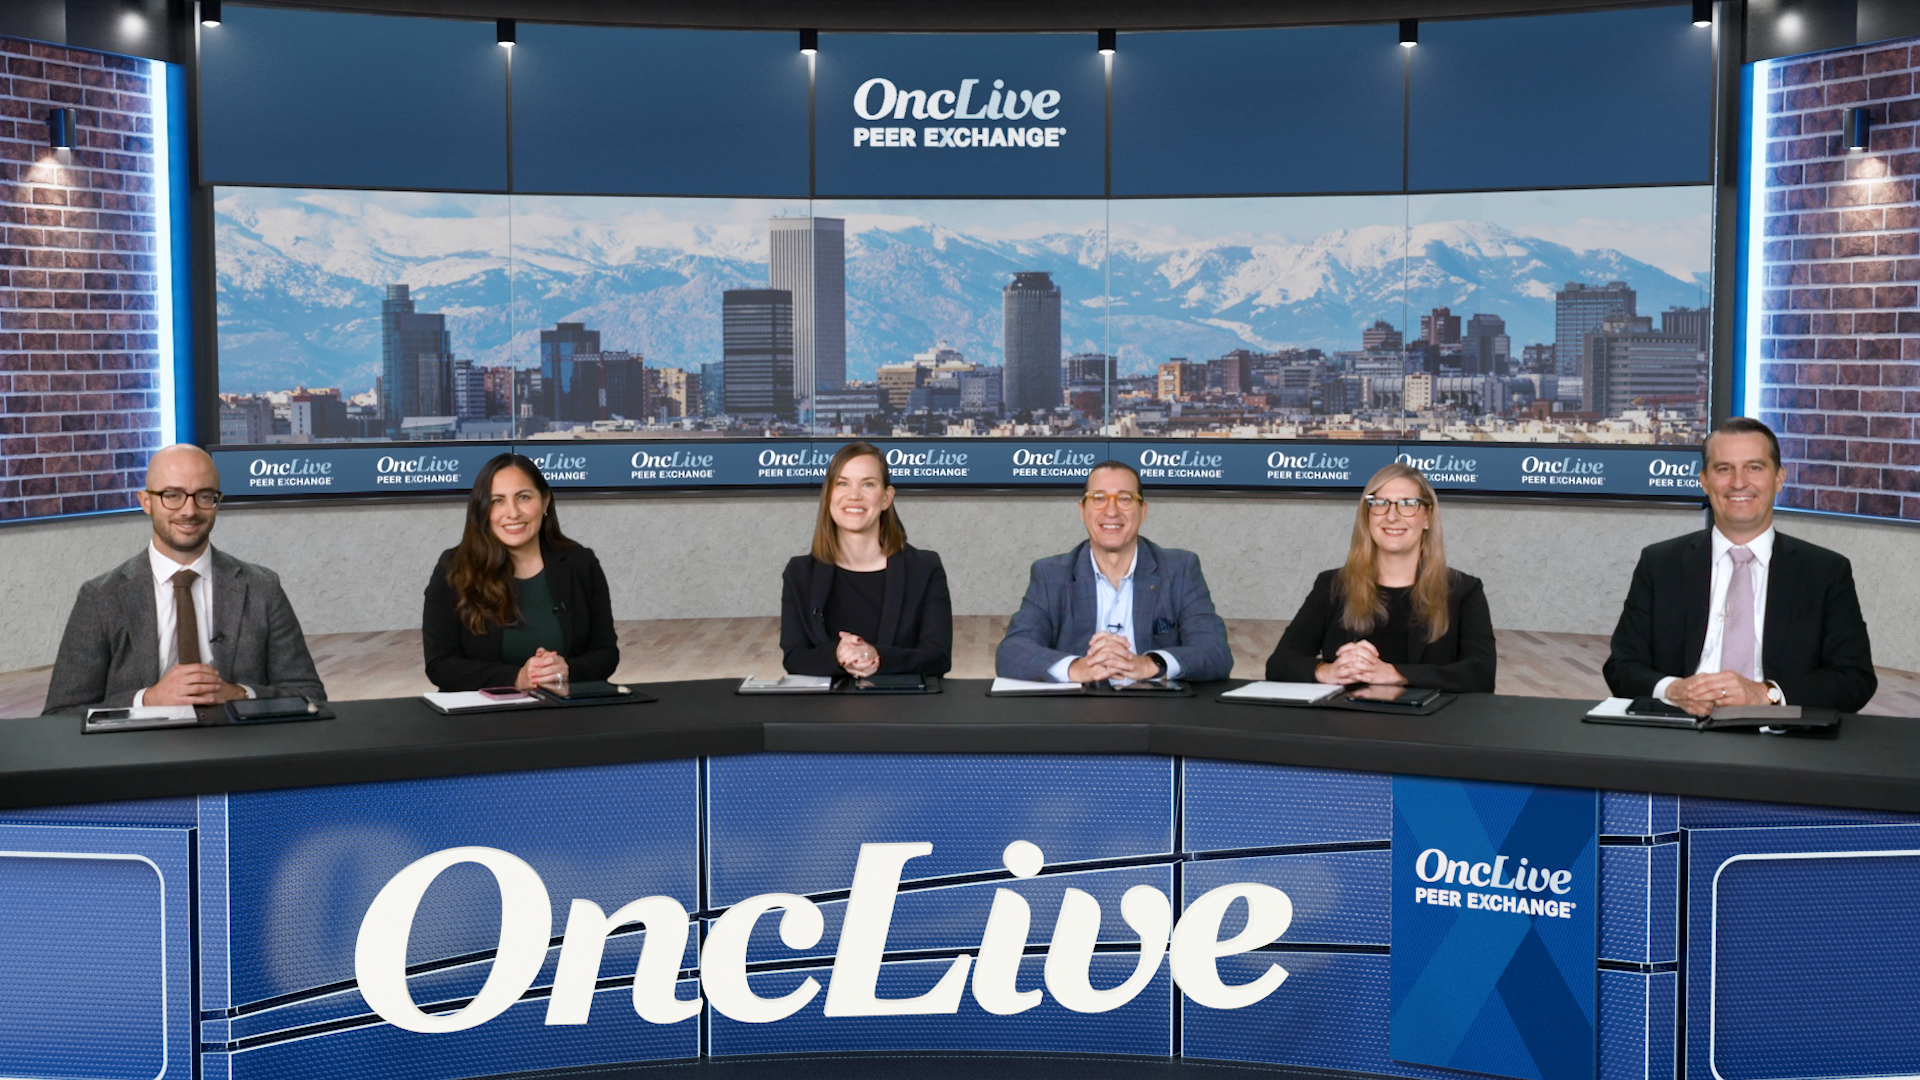 A panel of 6 experts on chronic lymphocytic leukemia seated at a long table